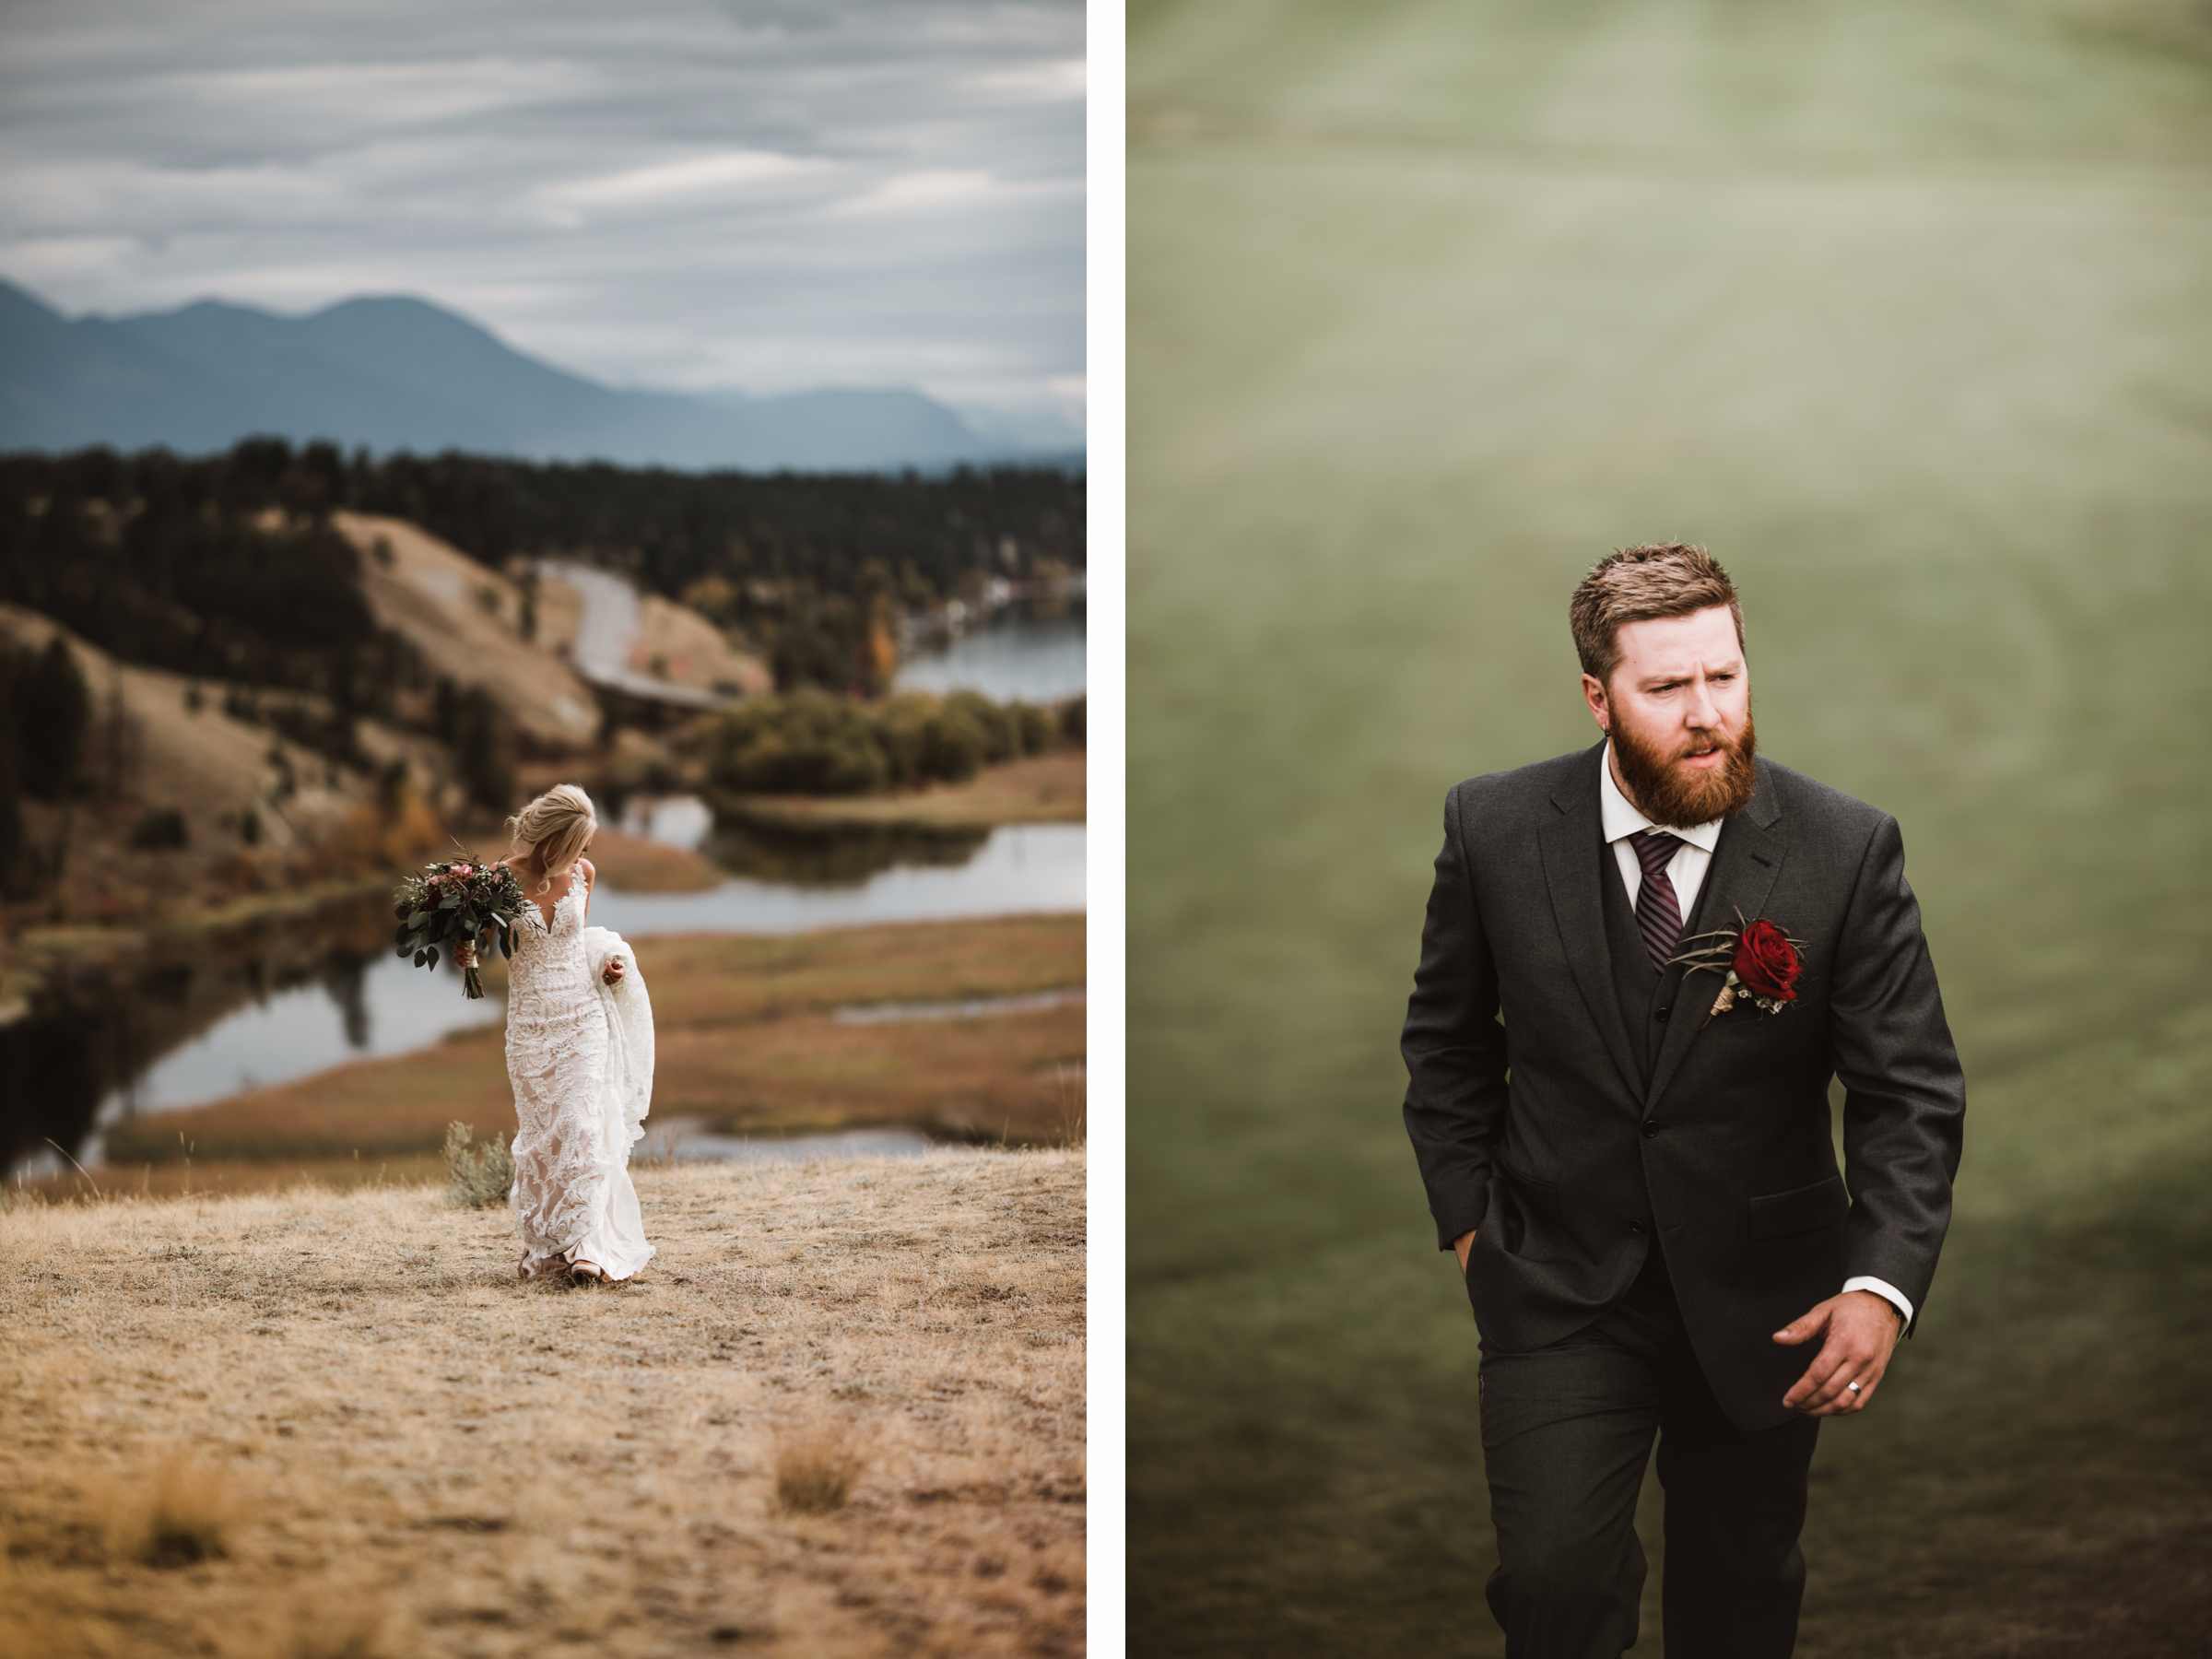 Calgary wedding photographer in Invermere for adventurous mountain destination elopement at Eagle Ranch Golf Resort, British Columbia - Image 28